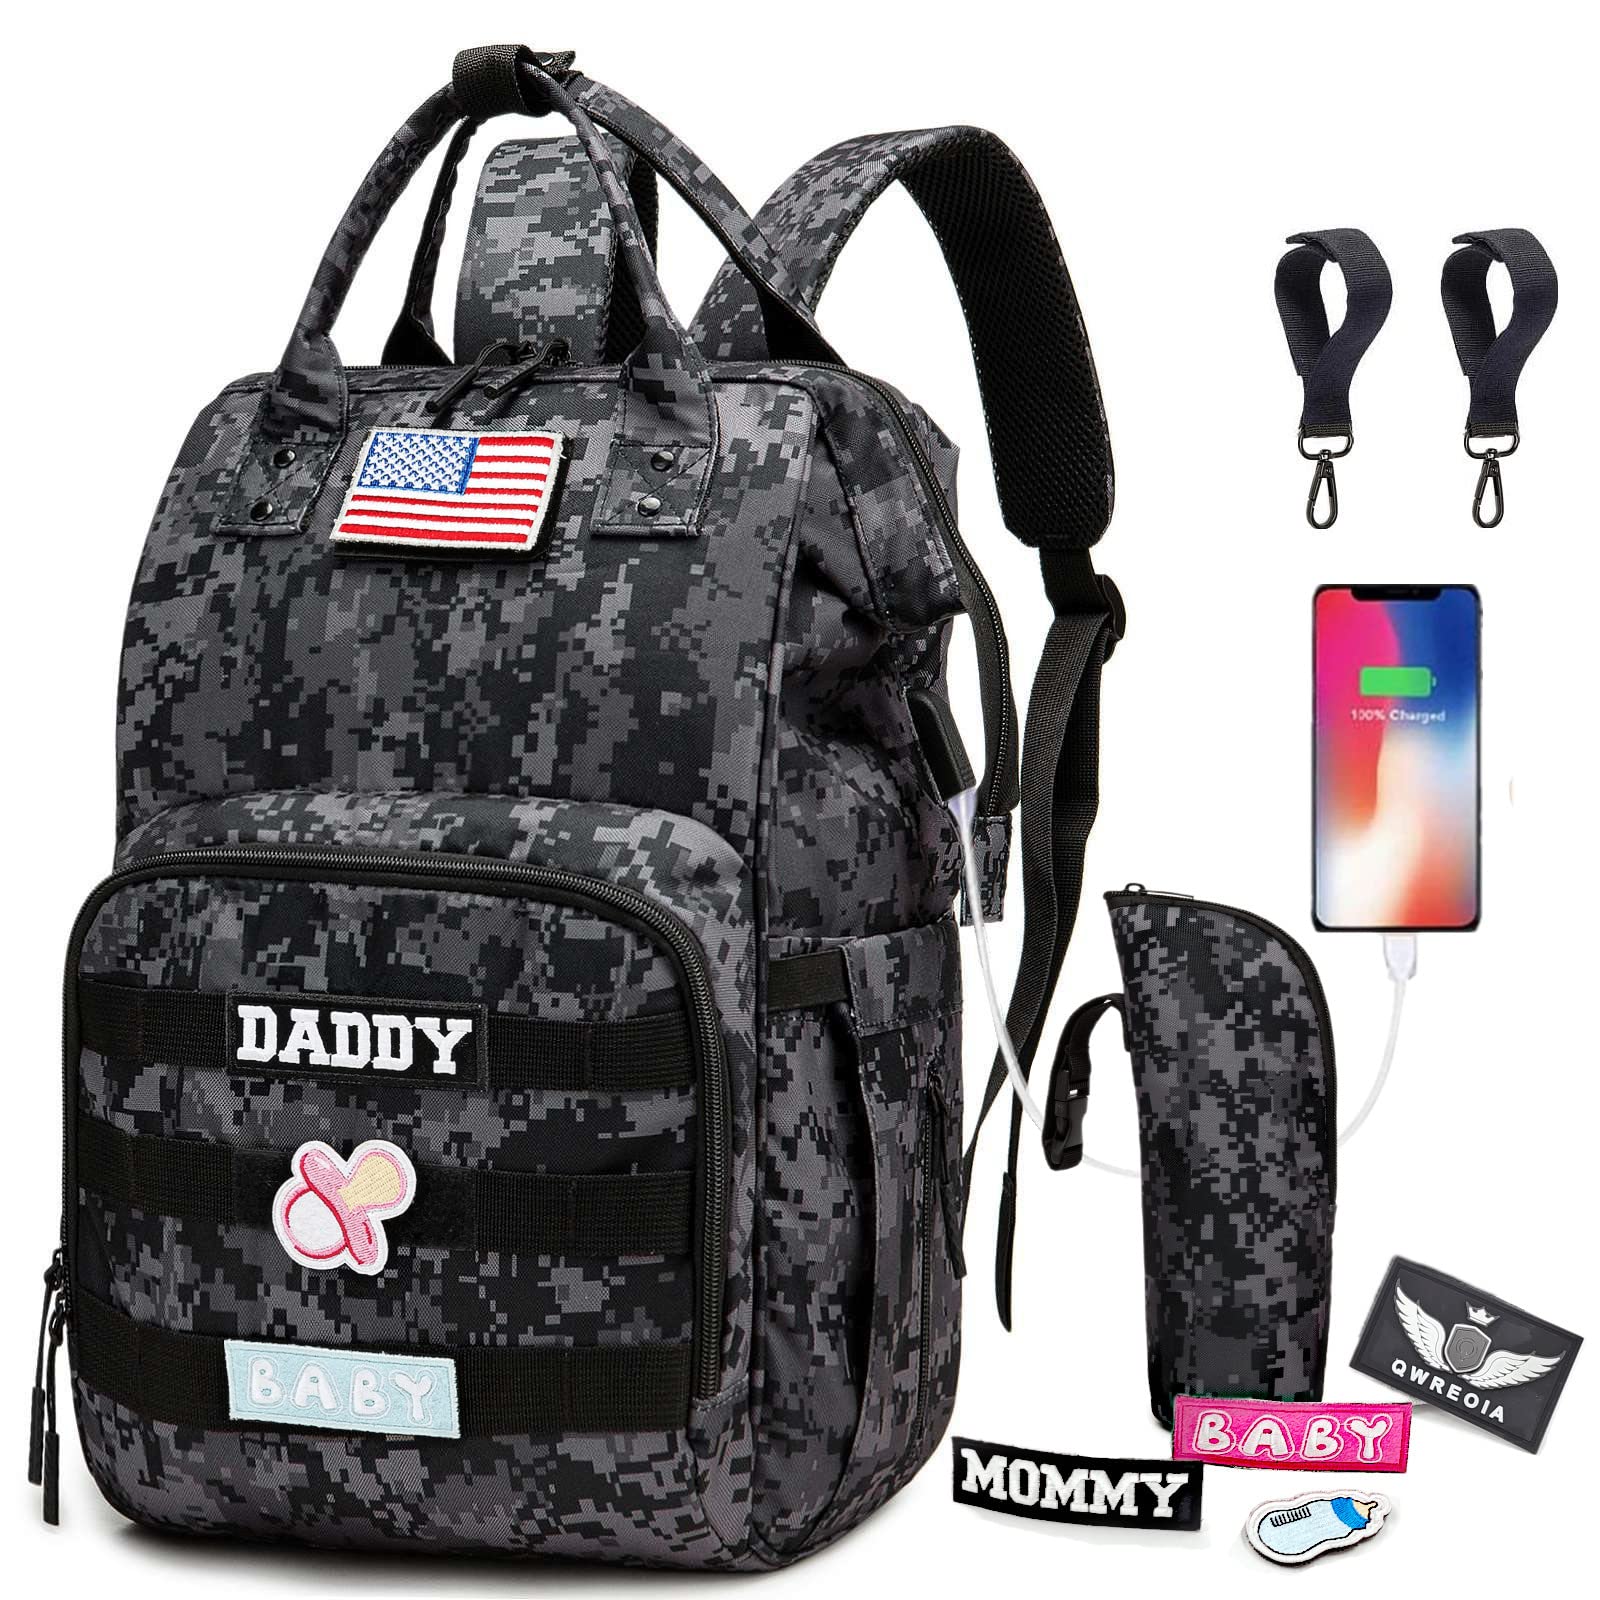 QWREOIA Camo Diaper Bag Backpack with USB Charging Port Stroller Straps and Insulated Pocket,army military Travel Nappy Backpack for Dad/Mom (DADDY and MOMMY patches)